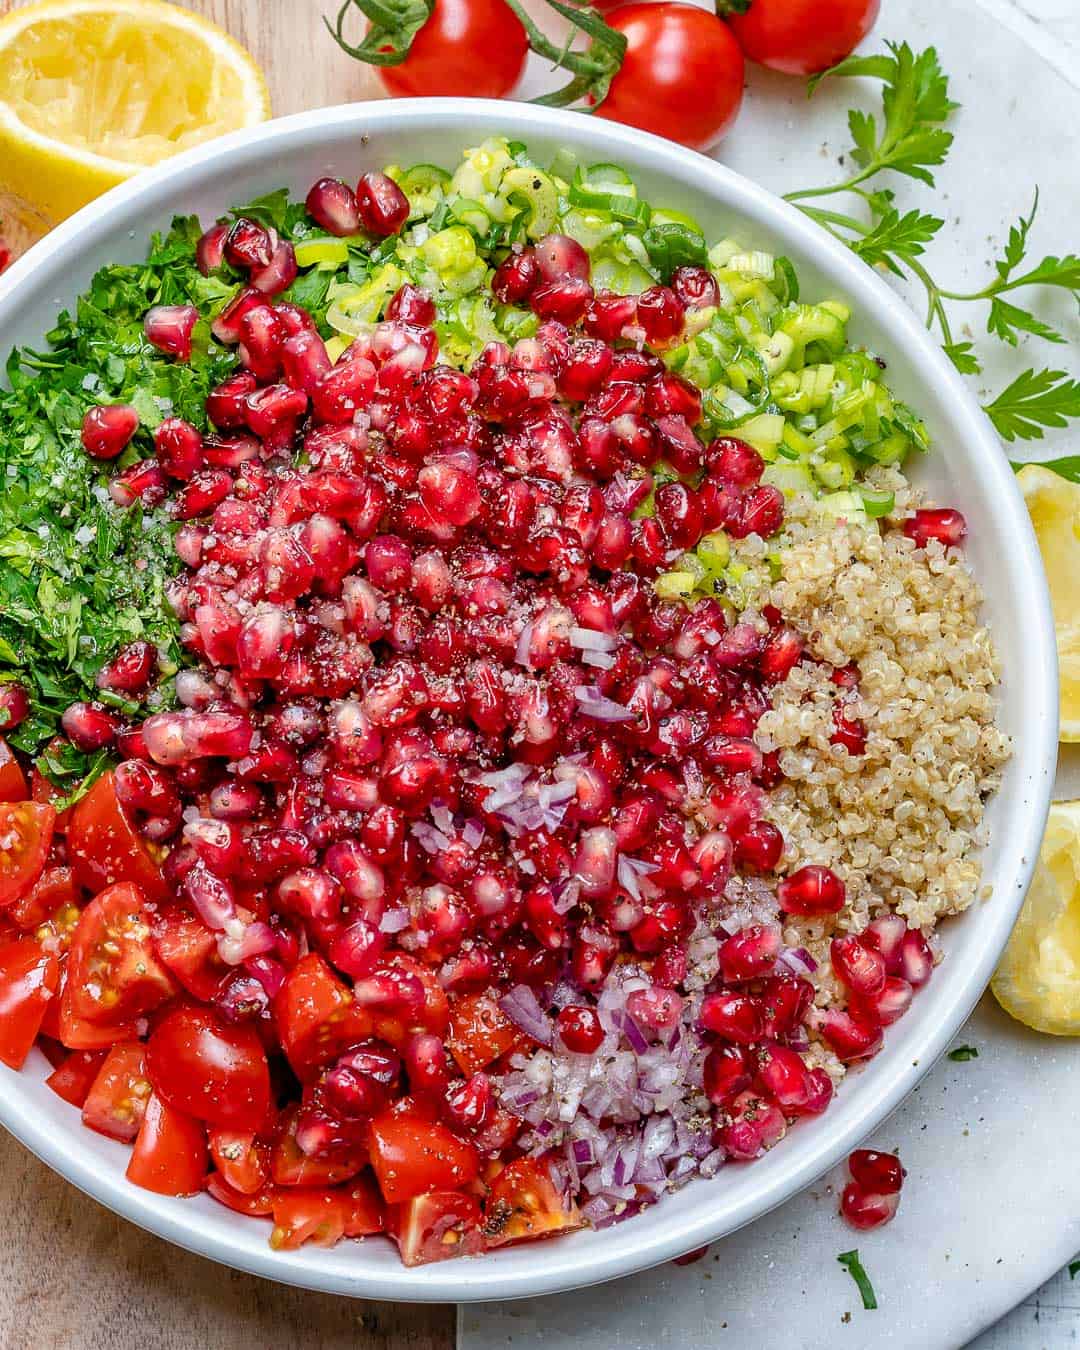 Quinoa Tabbouleh Salad Recipe The Best Healthy Fitness Meals,Pork Loin Country Style Ribs Boneless